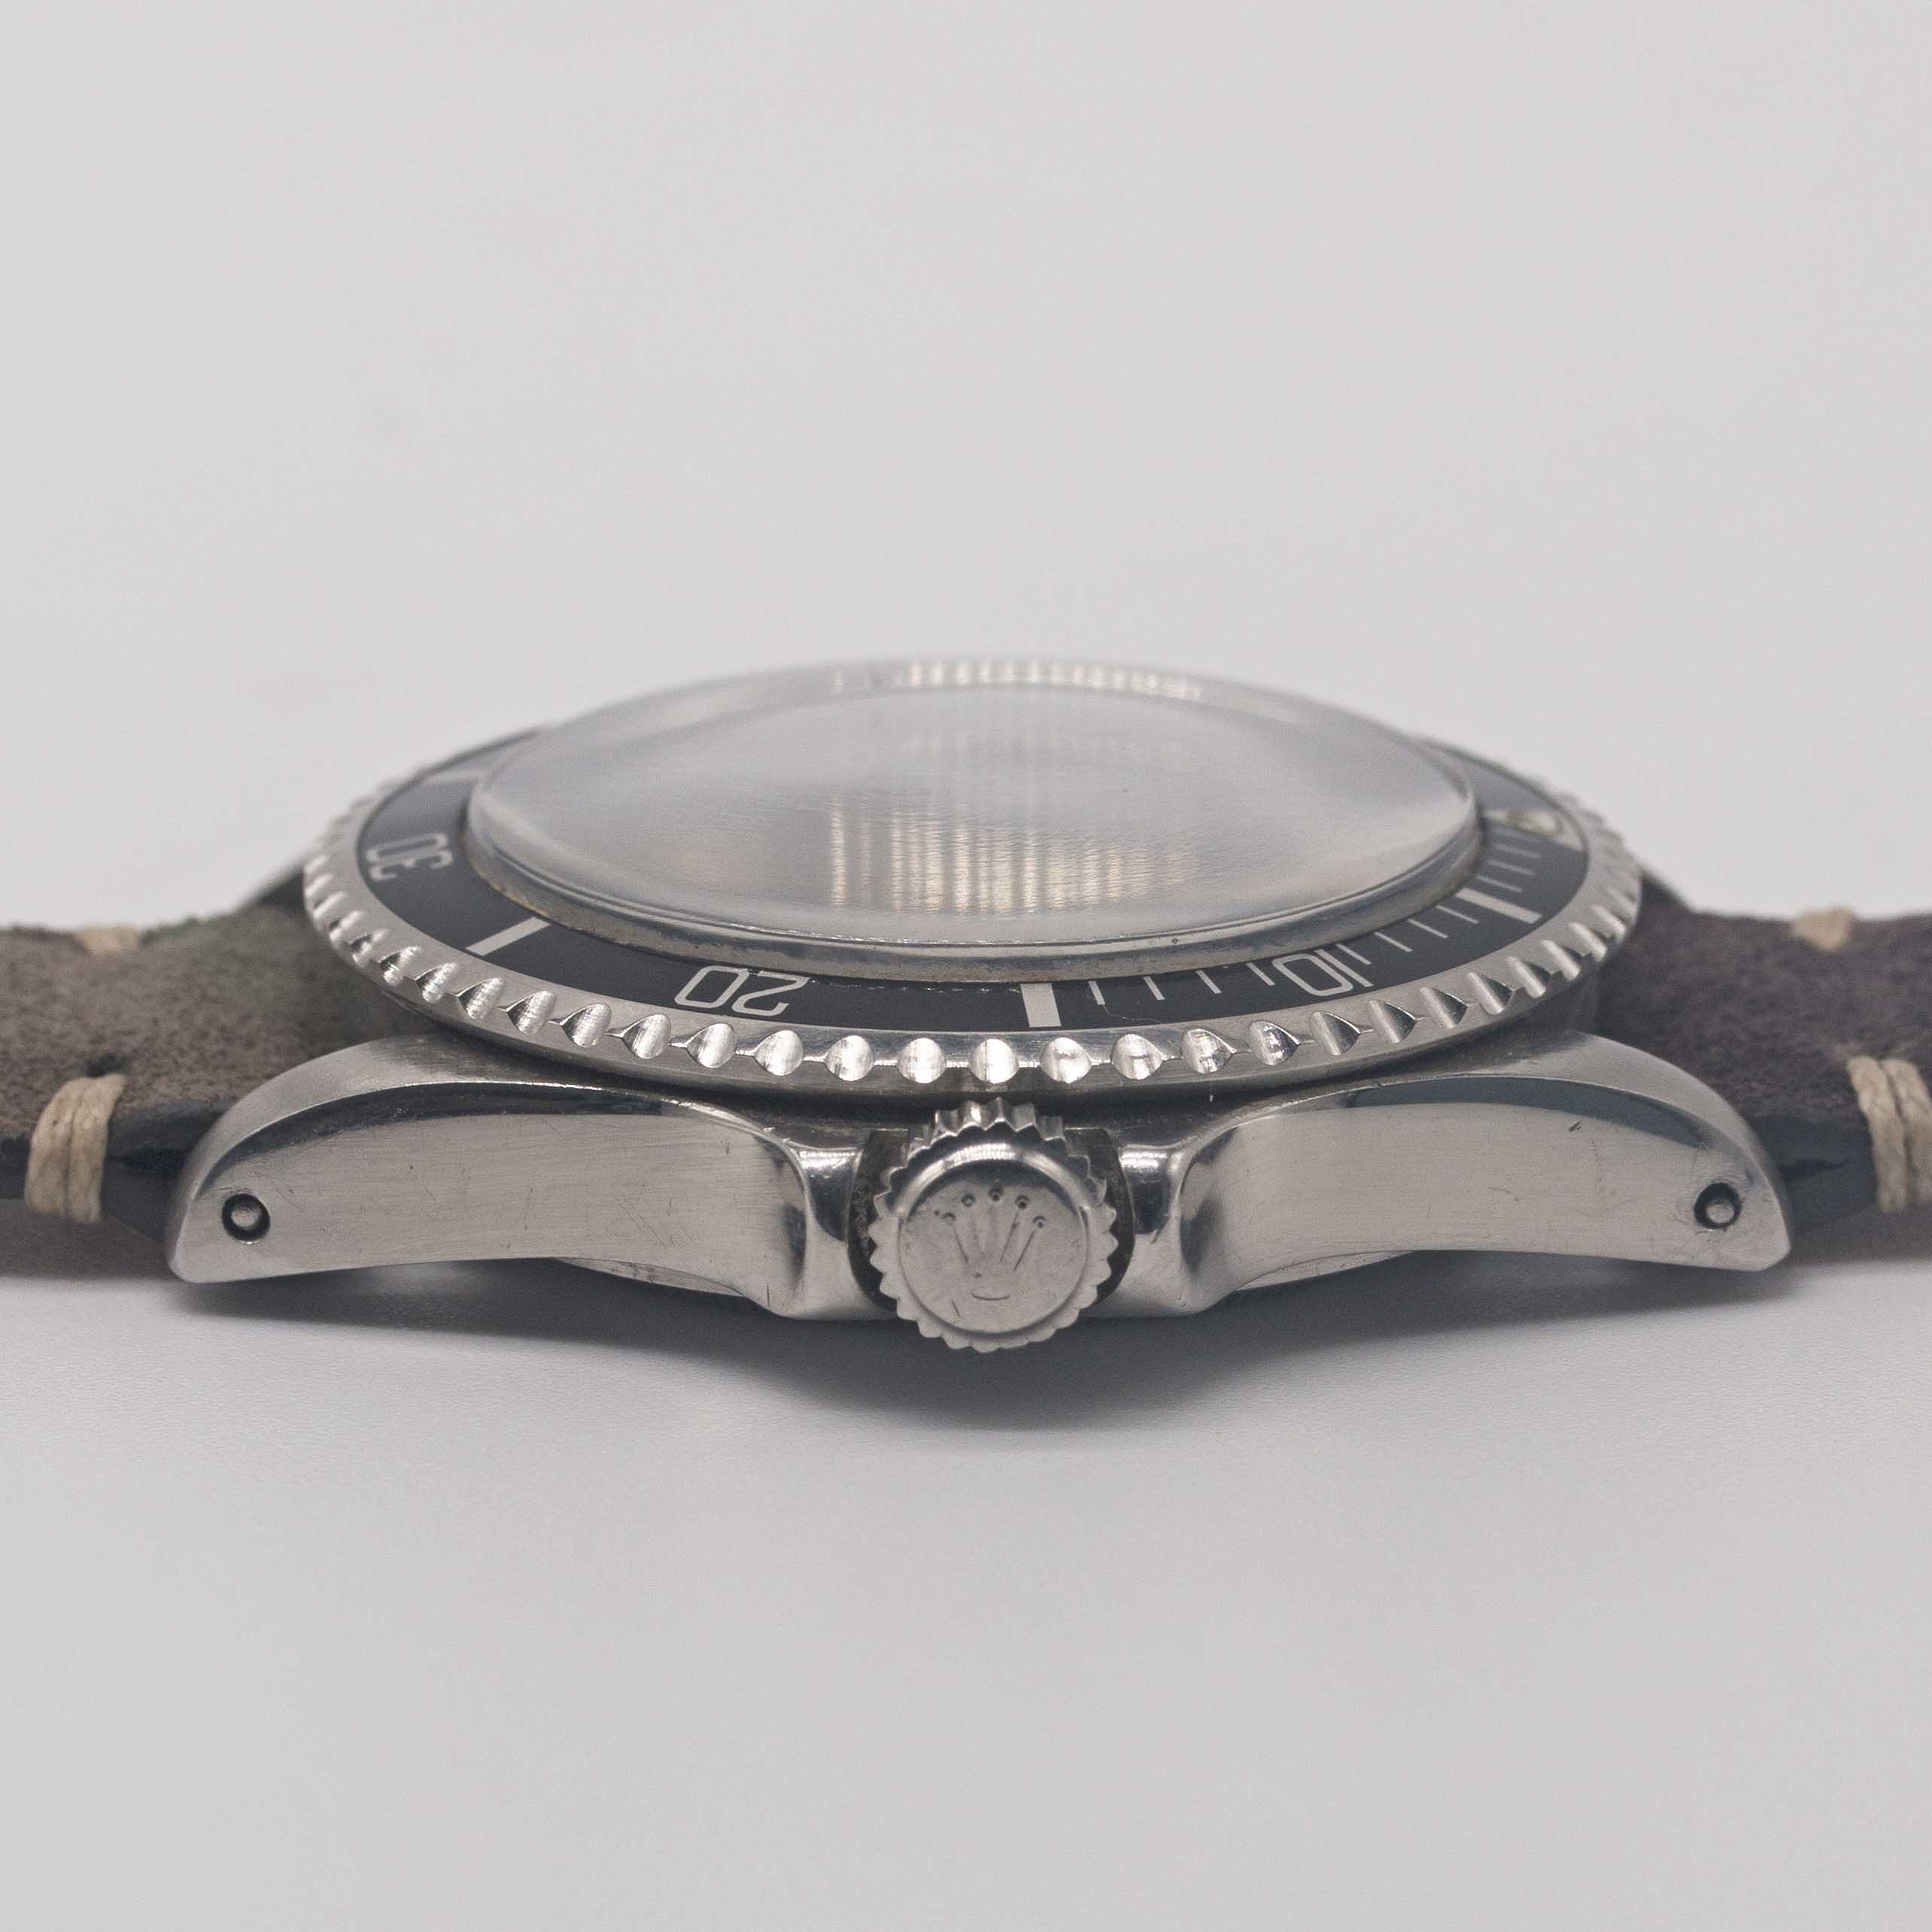 A GENTLEMAN'S STAINLESS STEEL ROLEX TUDOR OYSTER PRINCE SUBMARINER WRIST WATCH CIRCA 1967, REF. - Image 8 of 9